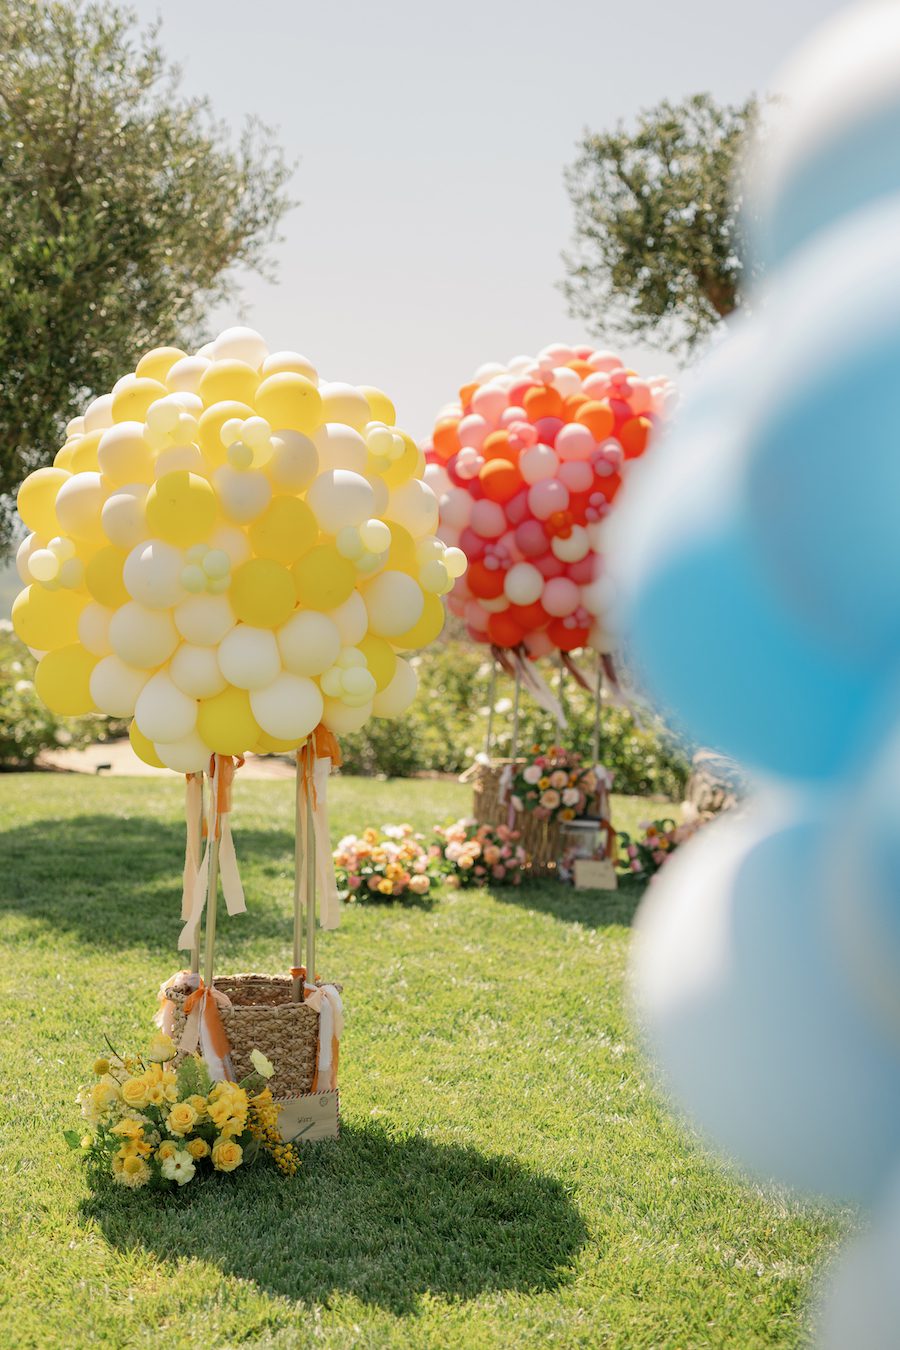 Details from this hot air balloon inspired proposal in Malibu CA